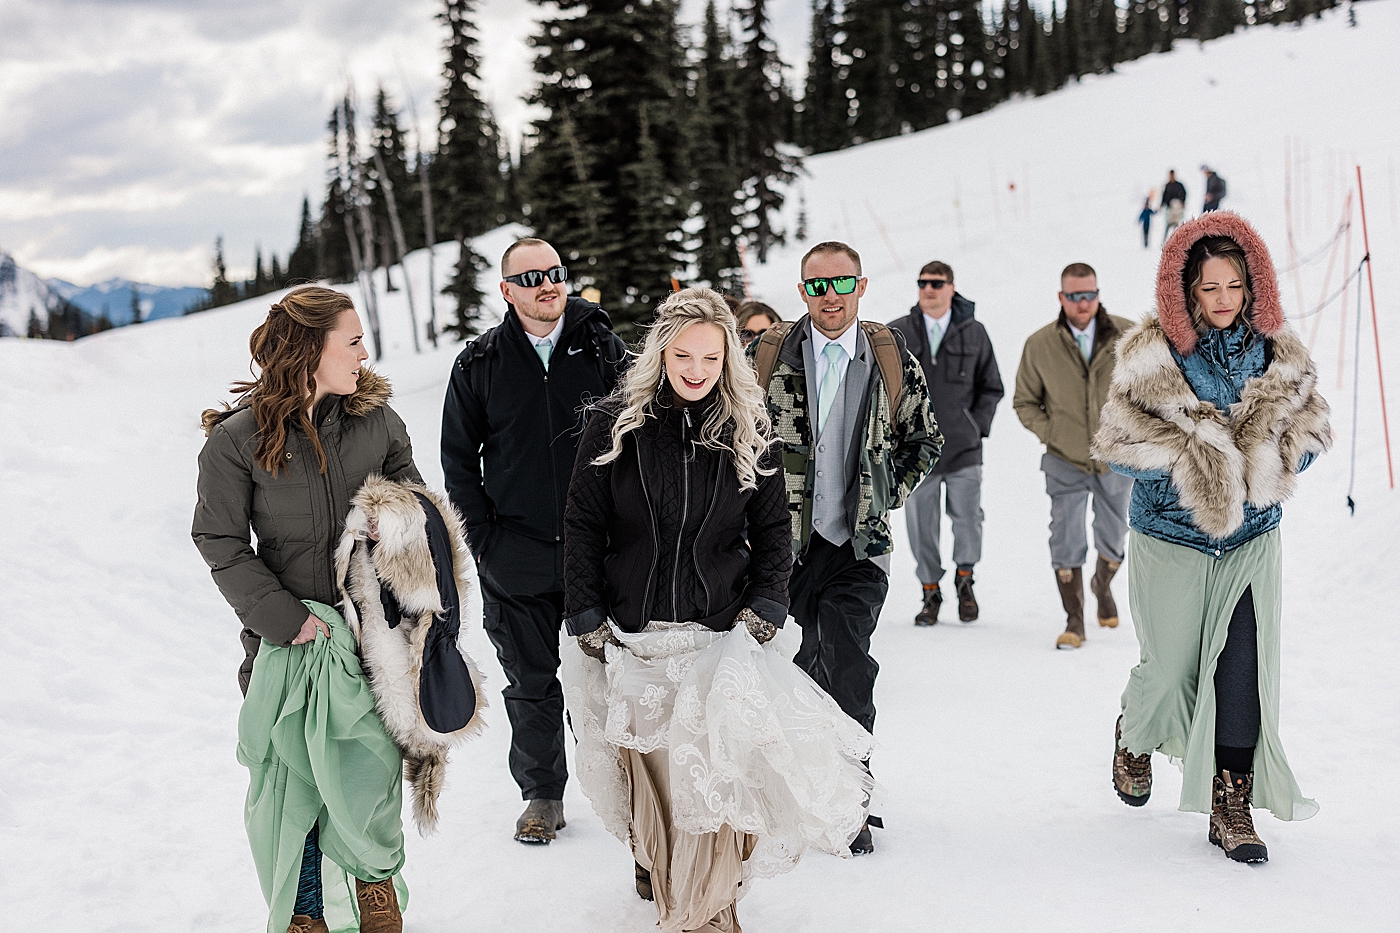 Wedding party hiking to elopement ceremony spot at Mt Rainier. Photo by Megan Montalvo Photography.